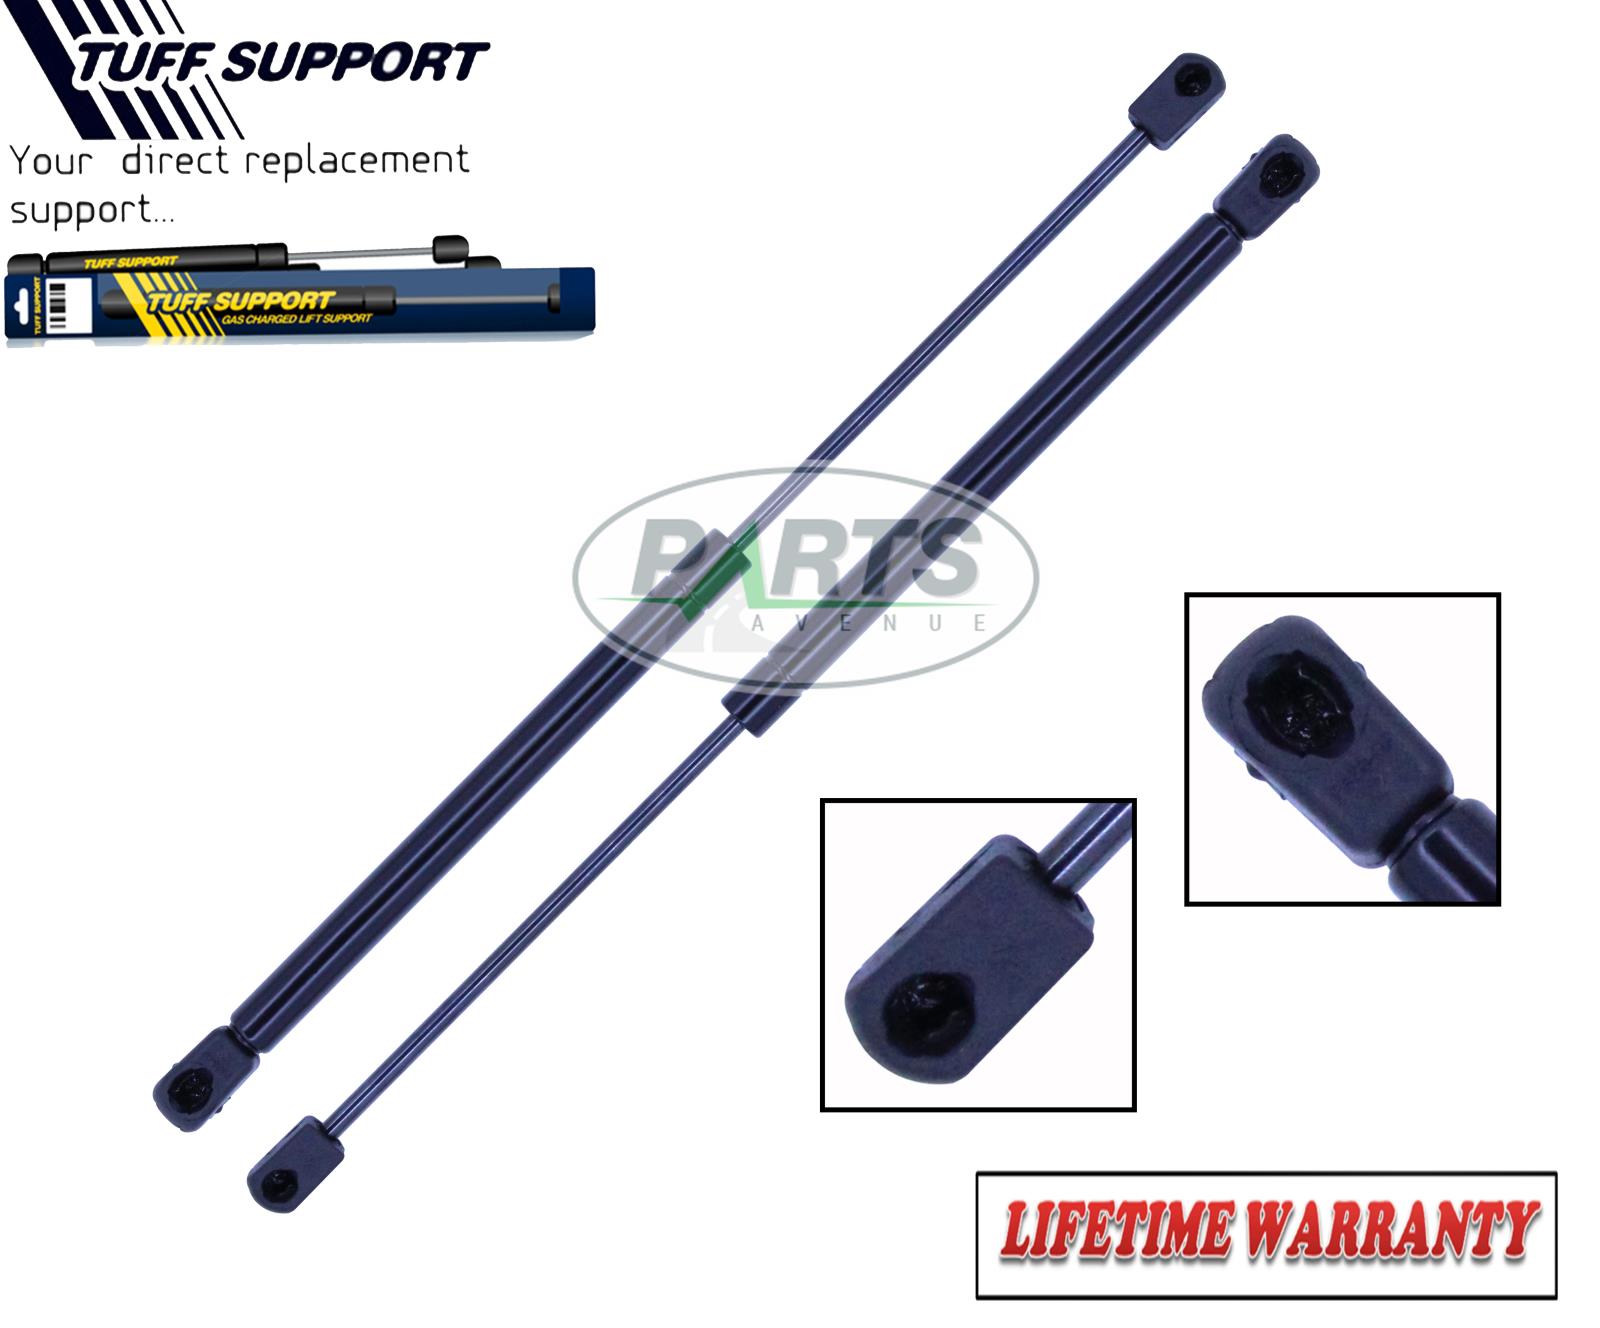 Pair Rear Trunk For 98-13 Chevy Corvette Convertible//Coupe Lift Support Strut